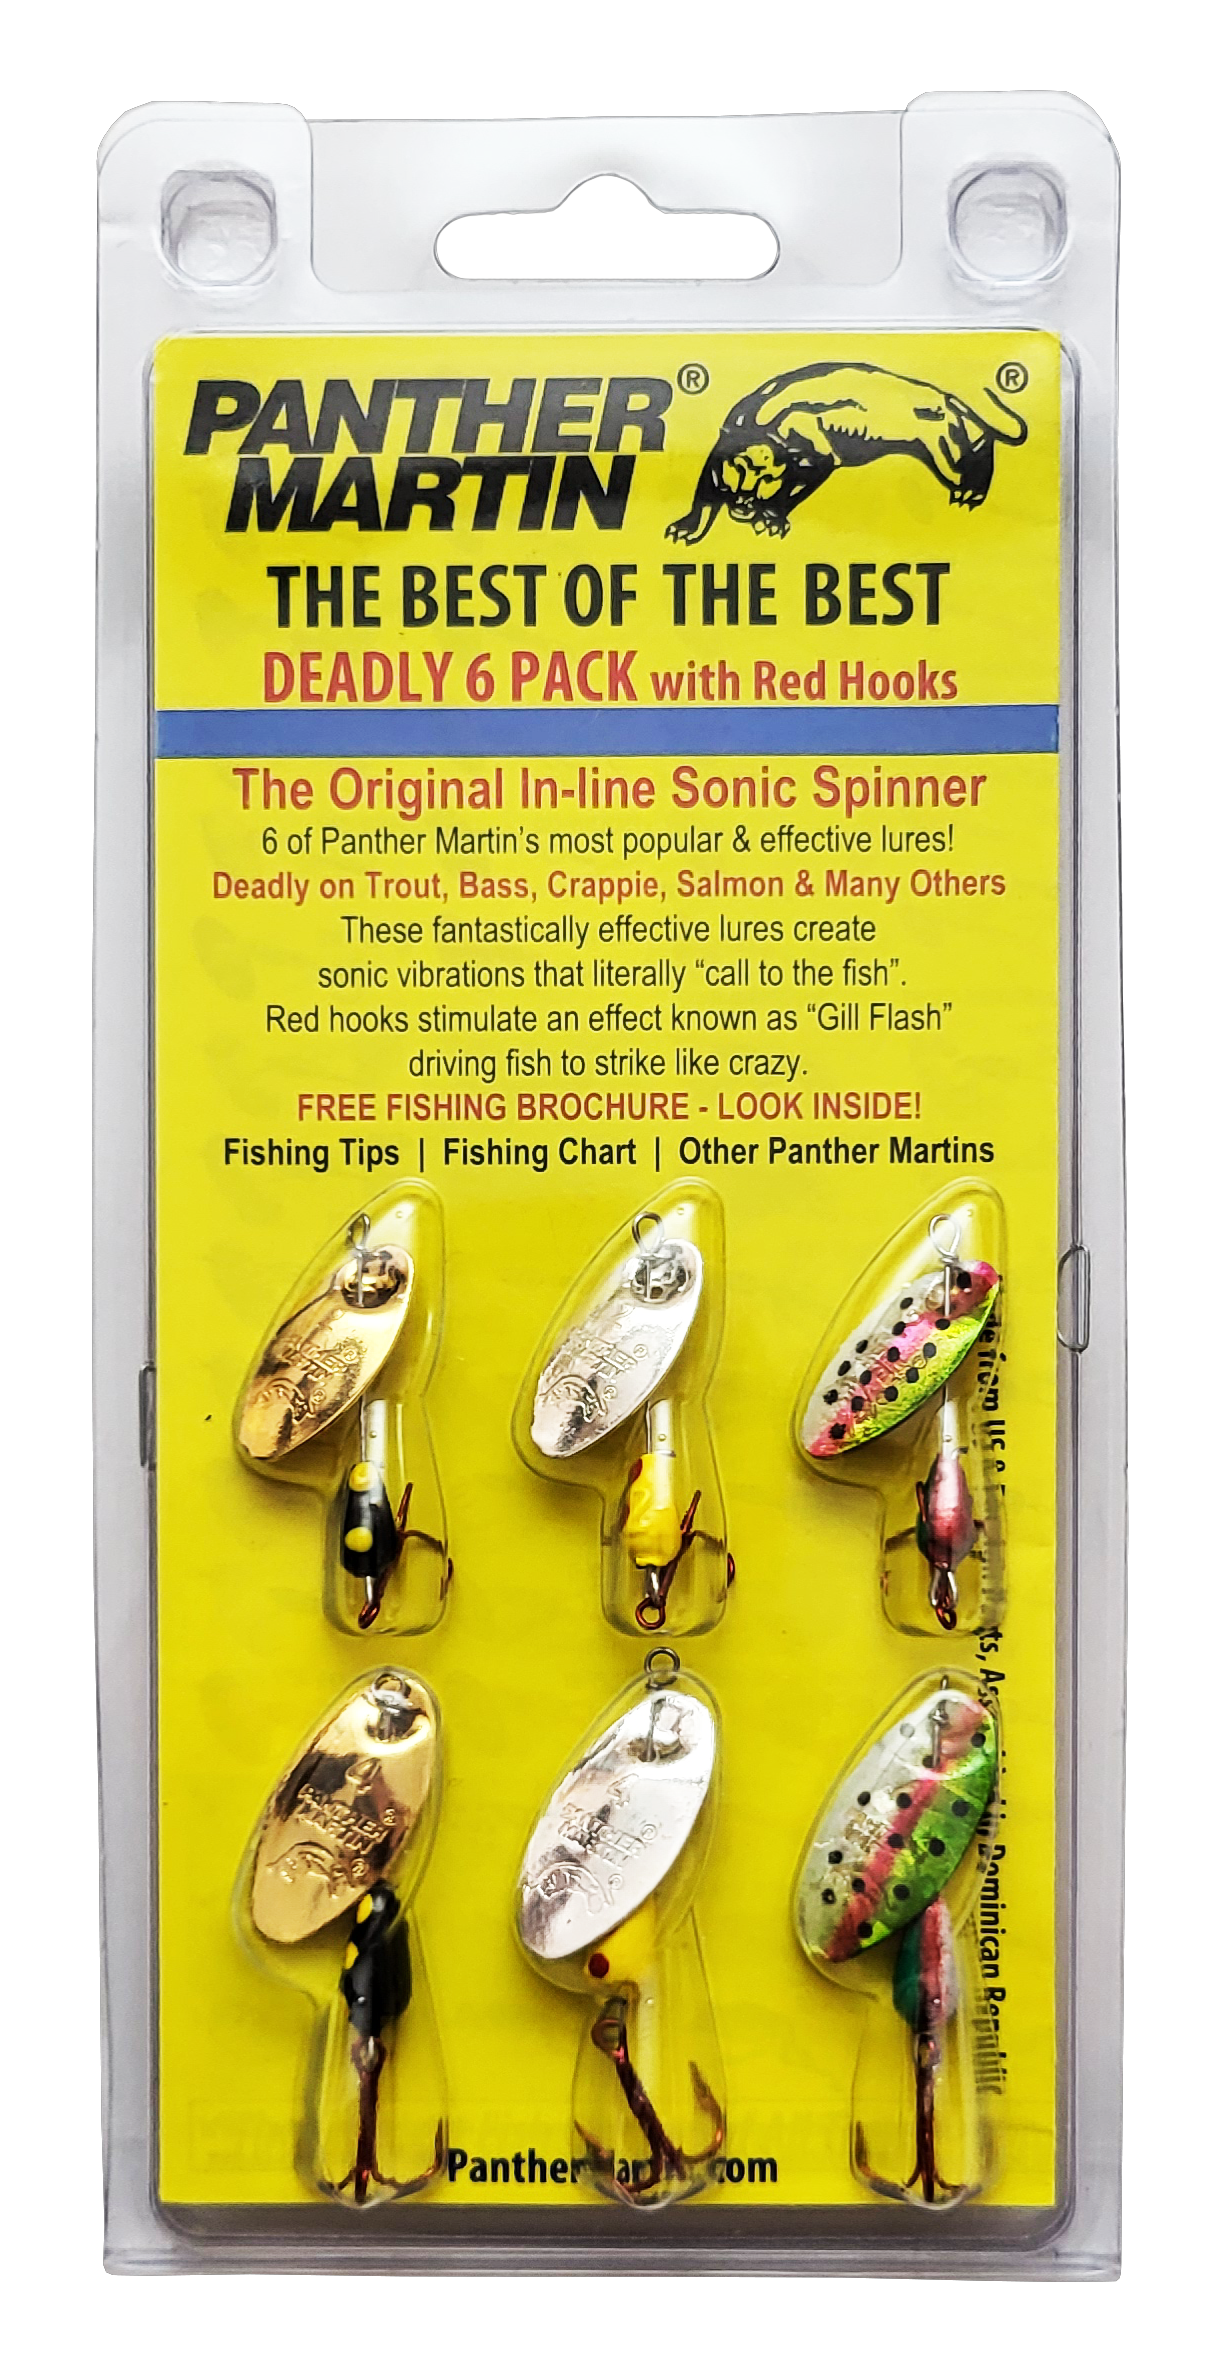 Panther Martin Spinner Trout Panfish Best of the Best Kit DSG6 Deadly